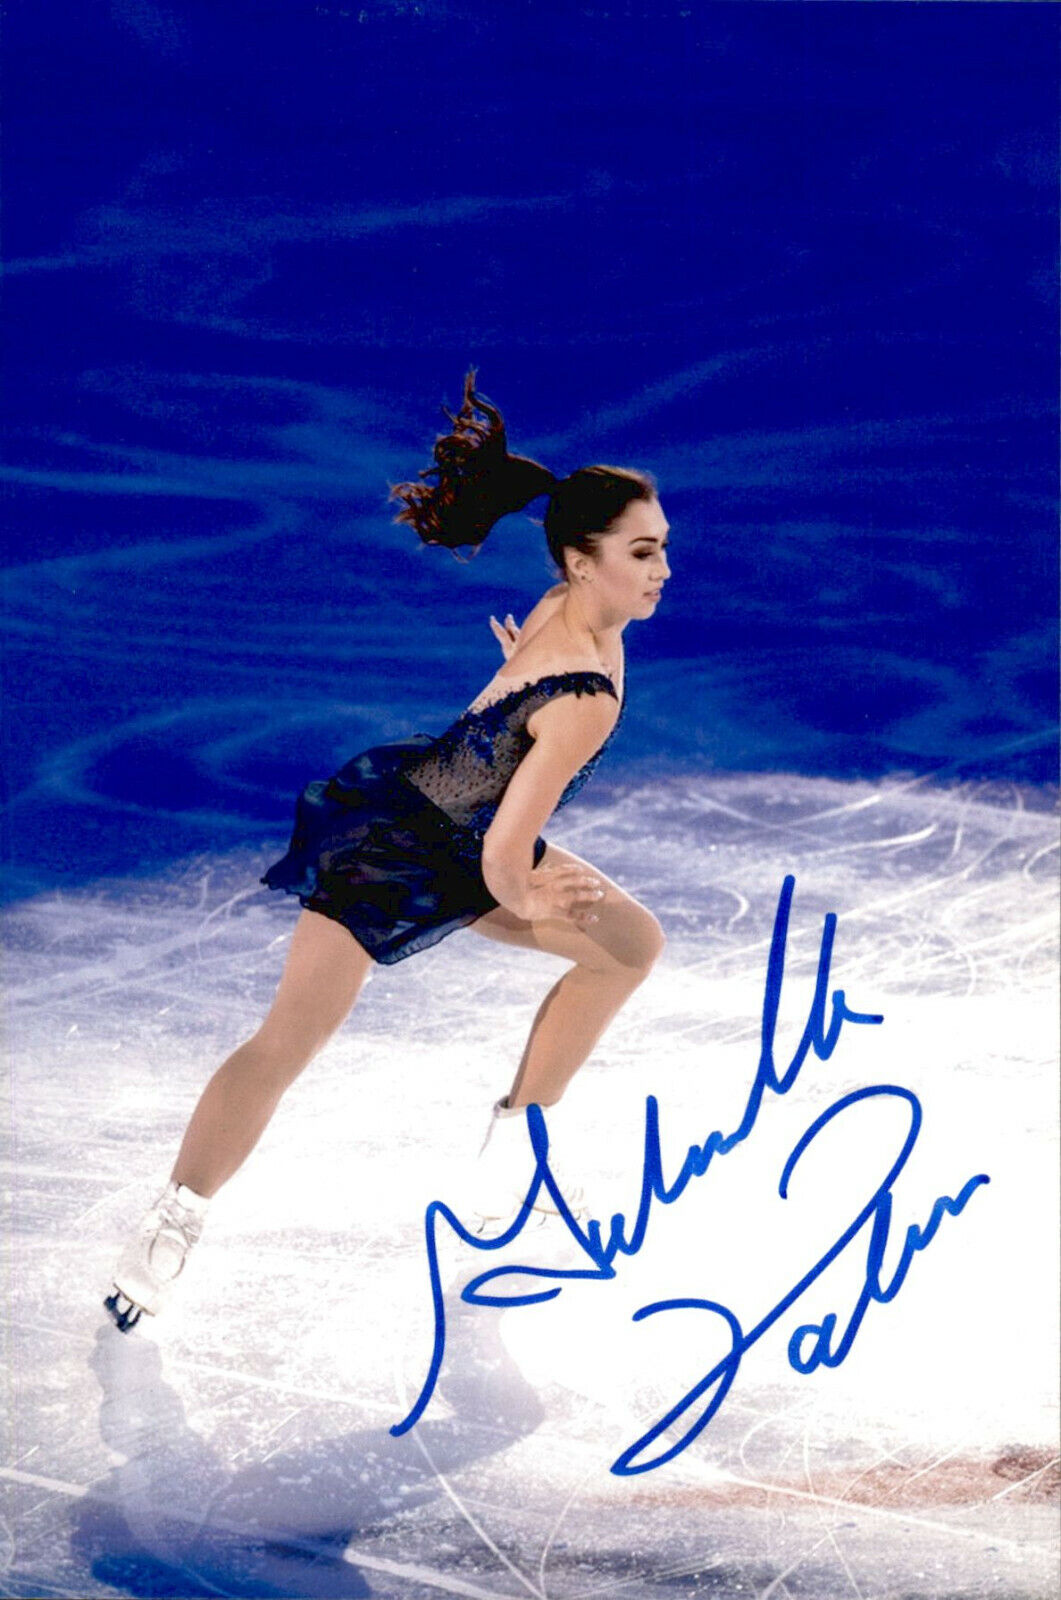 Gabrielle Daleman SIGNED 4x6 Photo Poster painting Figure Skating CANADIAN NATIONAL CHAMPION #2